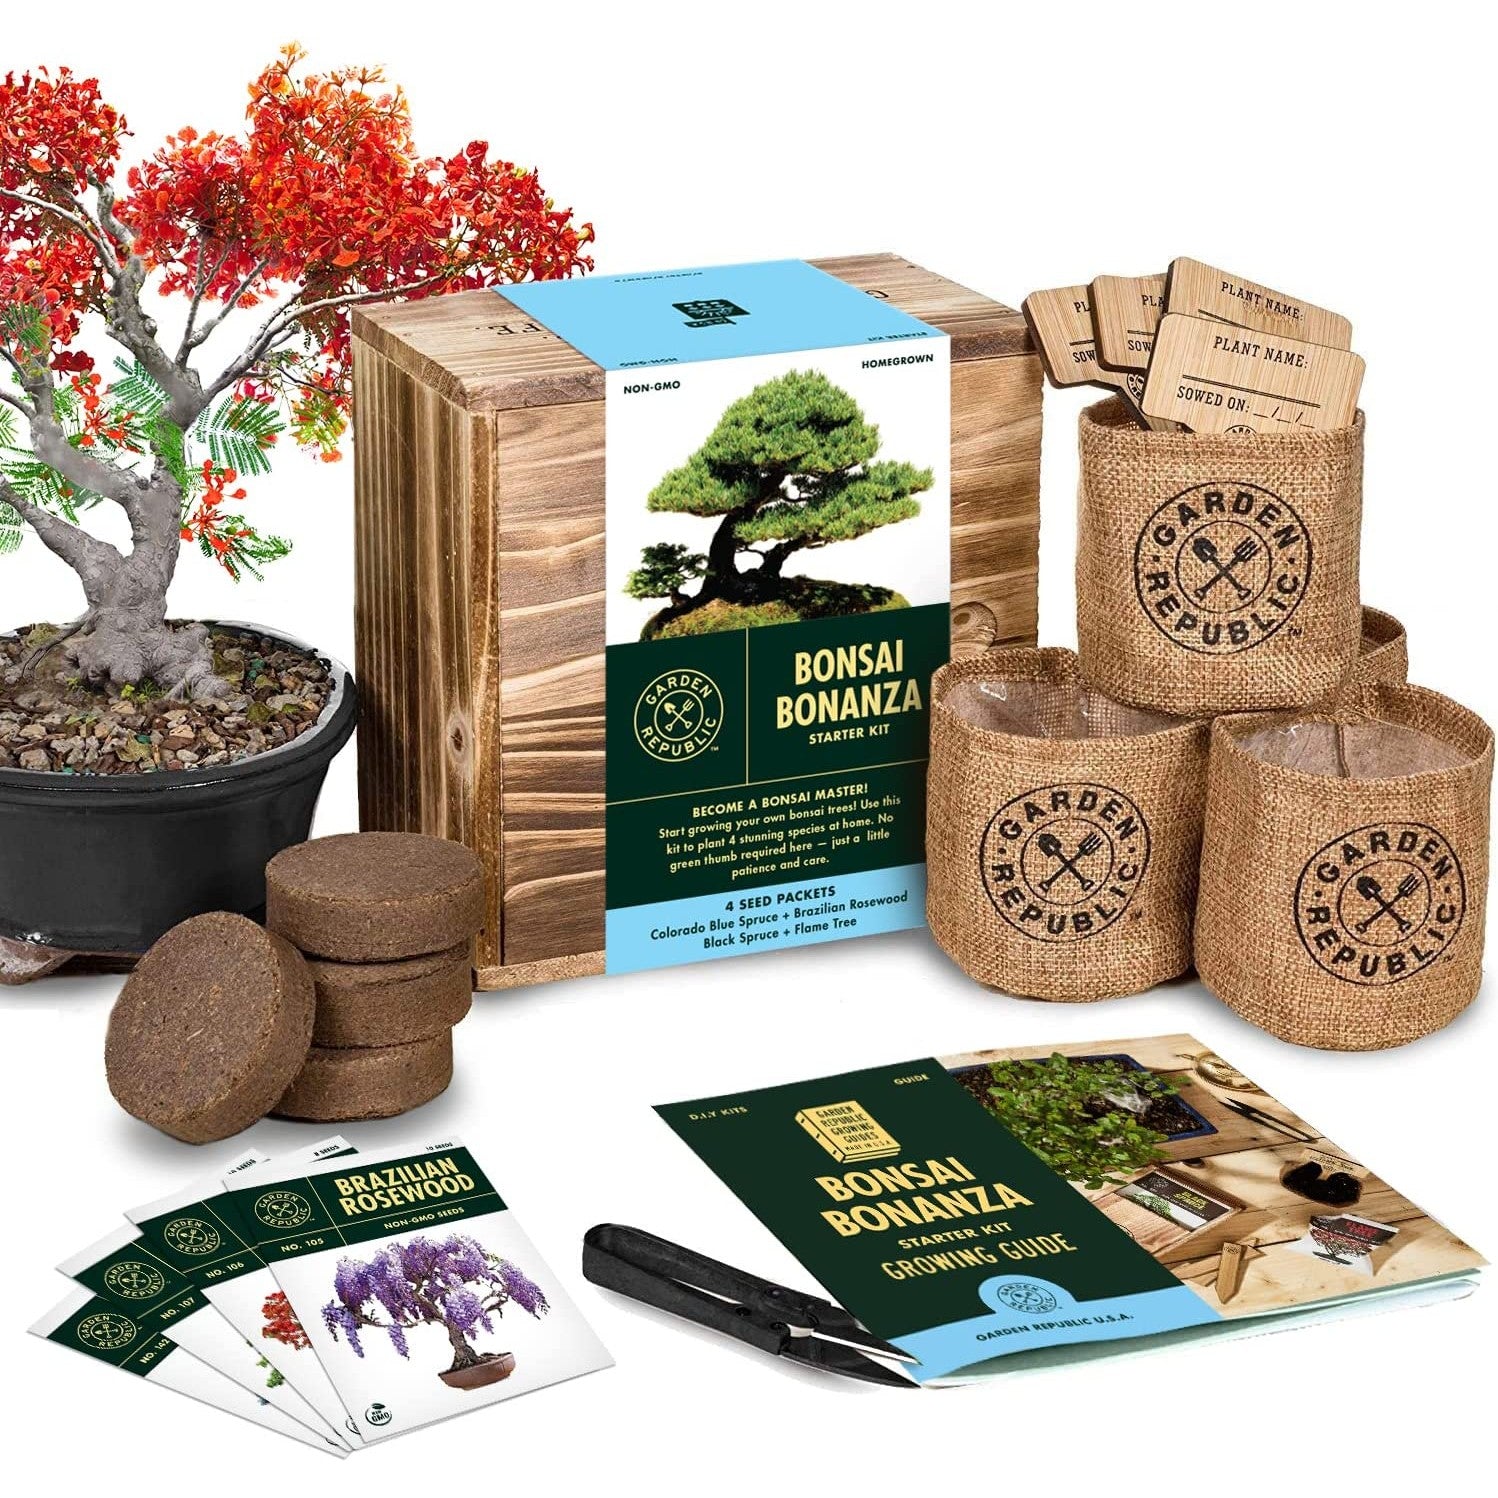 A complete bonsai starter growing kit showing a red colored bonsai and the items included with the kit.